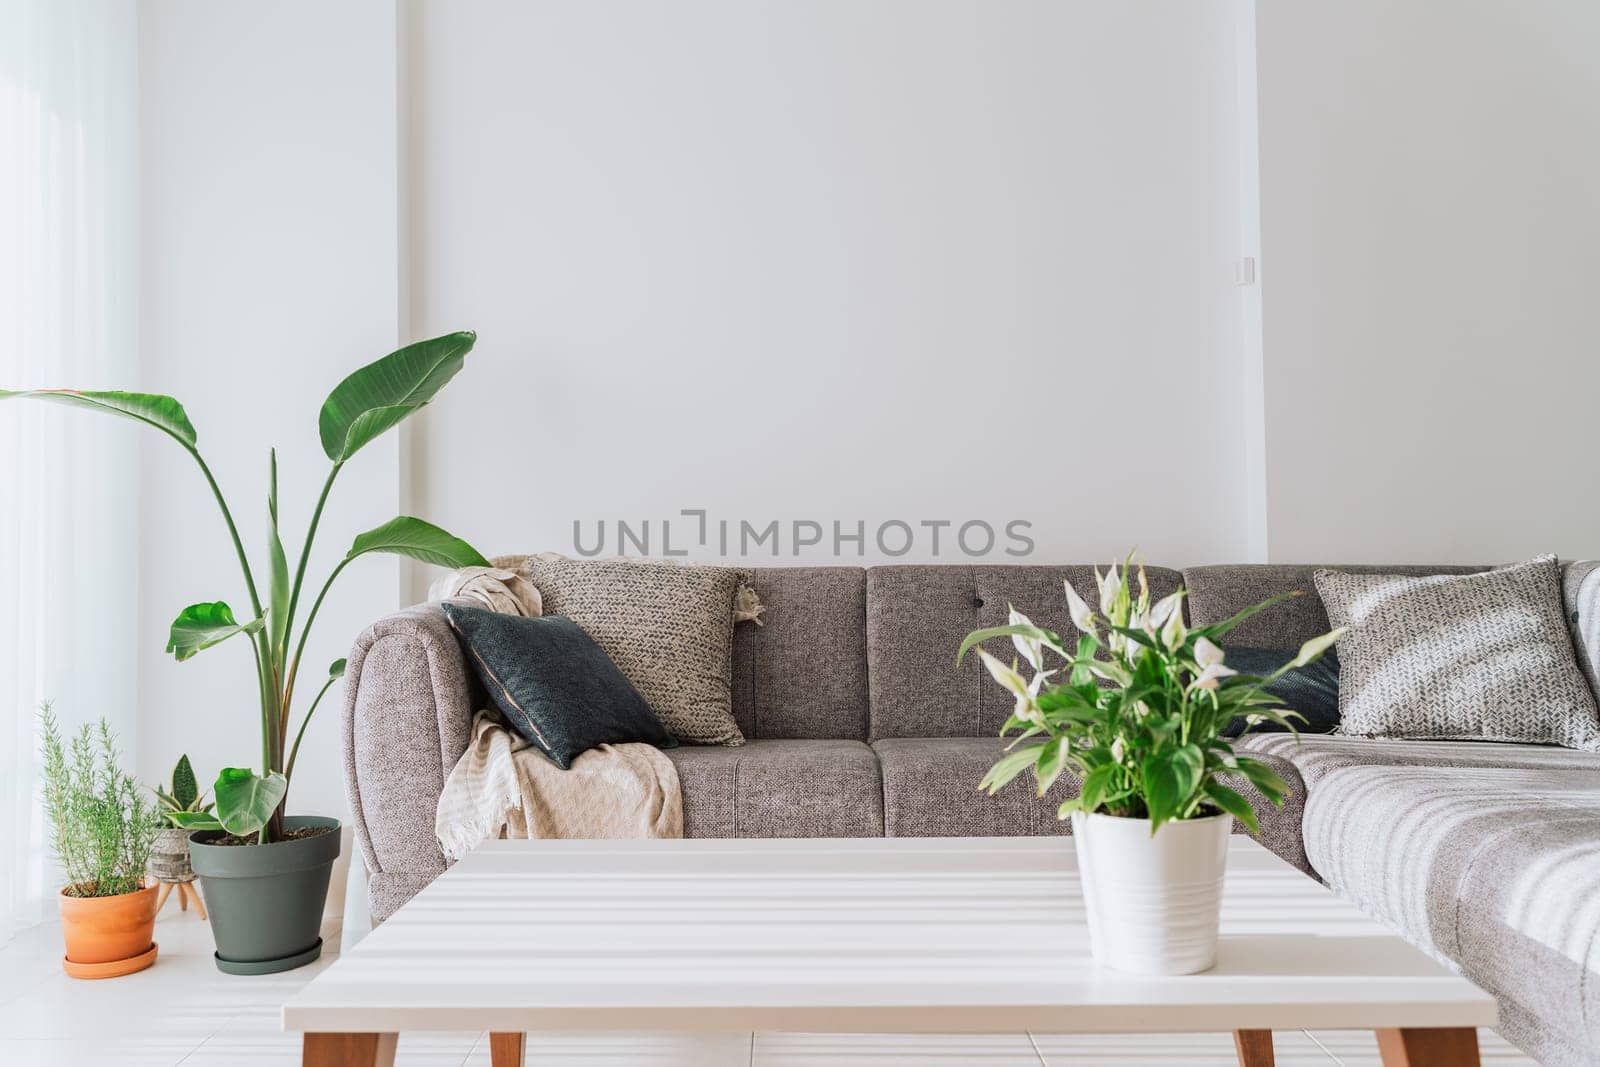 Modern minimalist light lit room interior white walls, white coffee table, grey velvet couch sofa green plants. Picture of light filled living room minimal furniture, plants, empty blank copy space